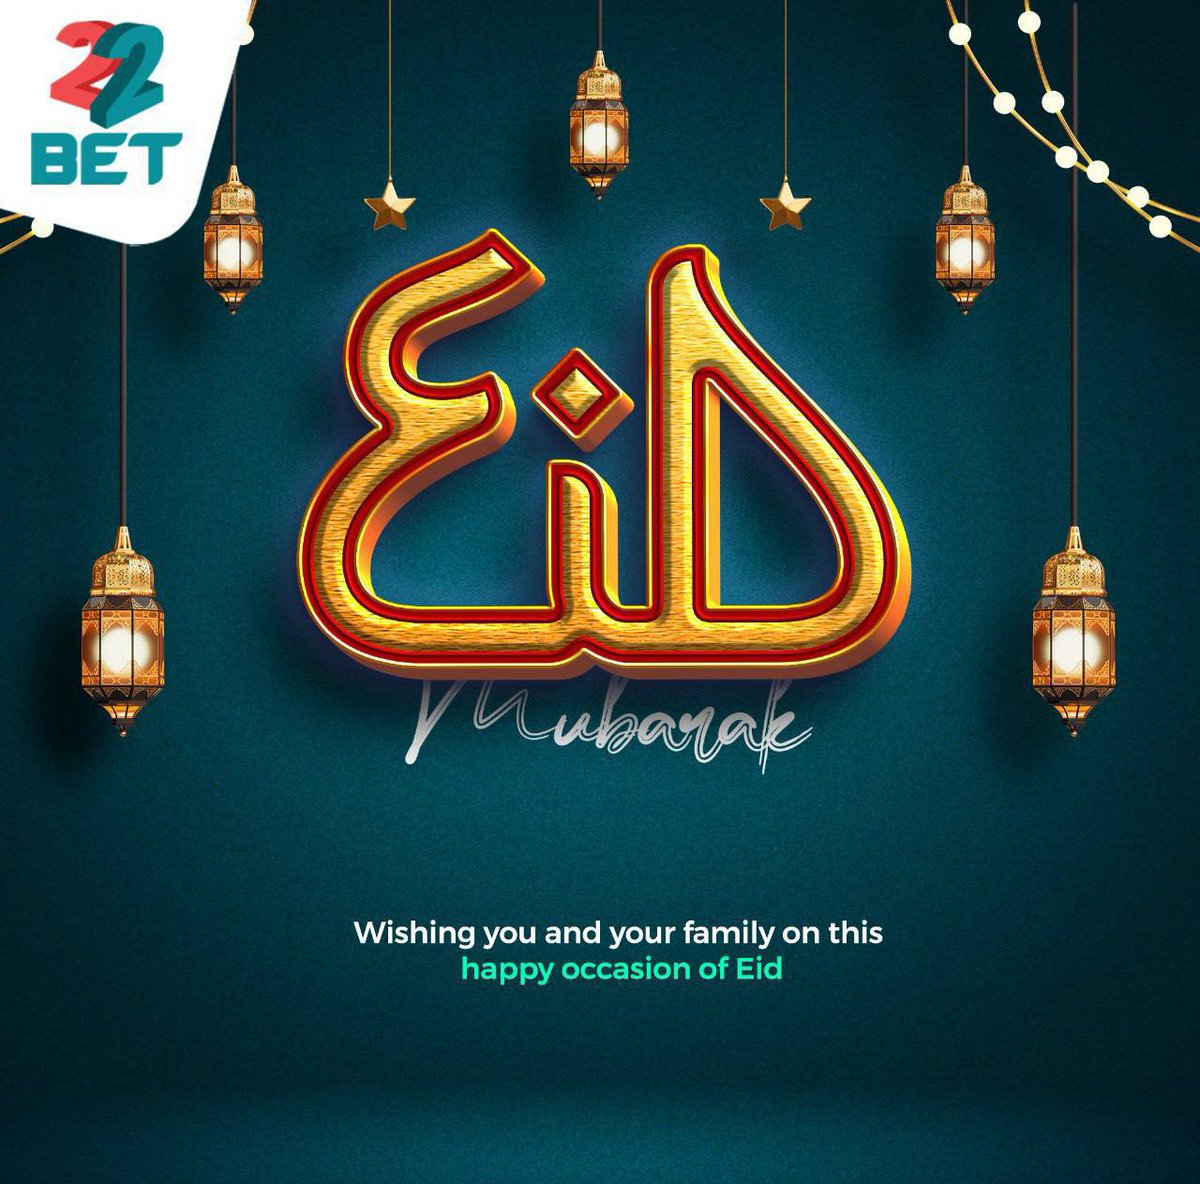 🕊️ To our beloved Muslim community, may this Eid-ul-Fitr be filled with boundless love, serene harmony, and unbridled joy. 🌙 May your days be as radiant as the Eid moon. Eid Mubarak! Discover more at 22Bet.com #22Bet #BestOdds #Switchto22Bet #Ramadan